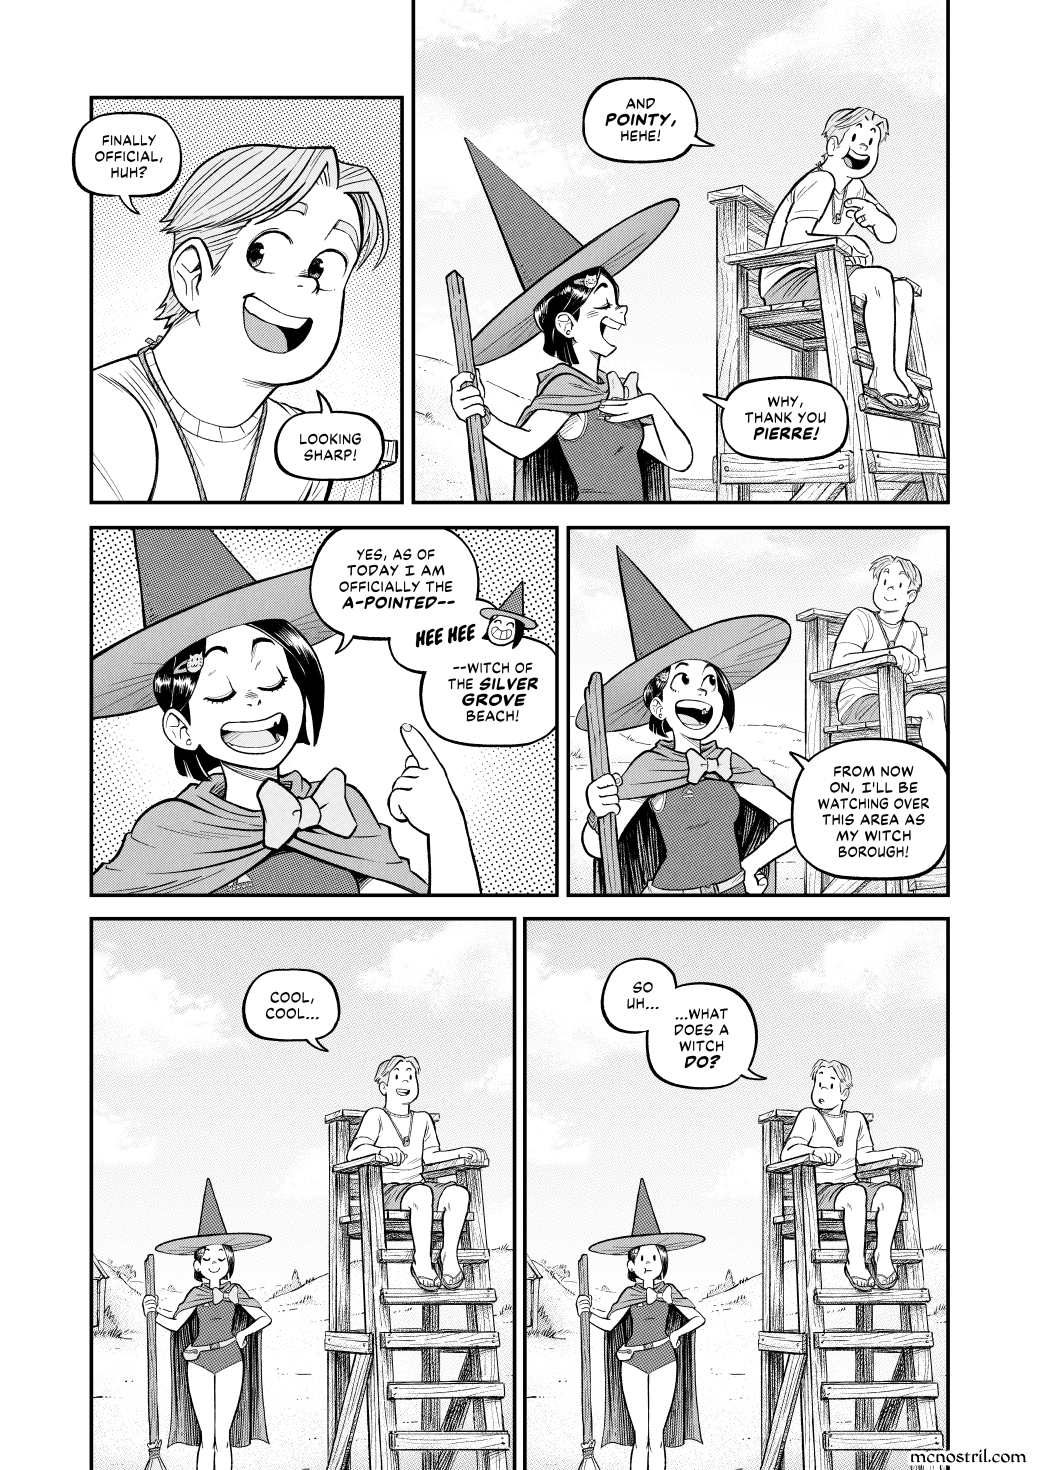 Witches operate outside the law, so that criminal wordplay will go un-pun-ished.